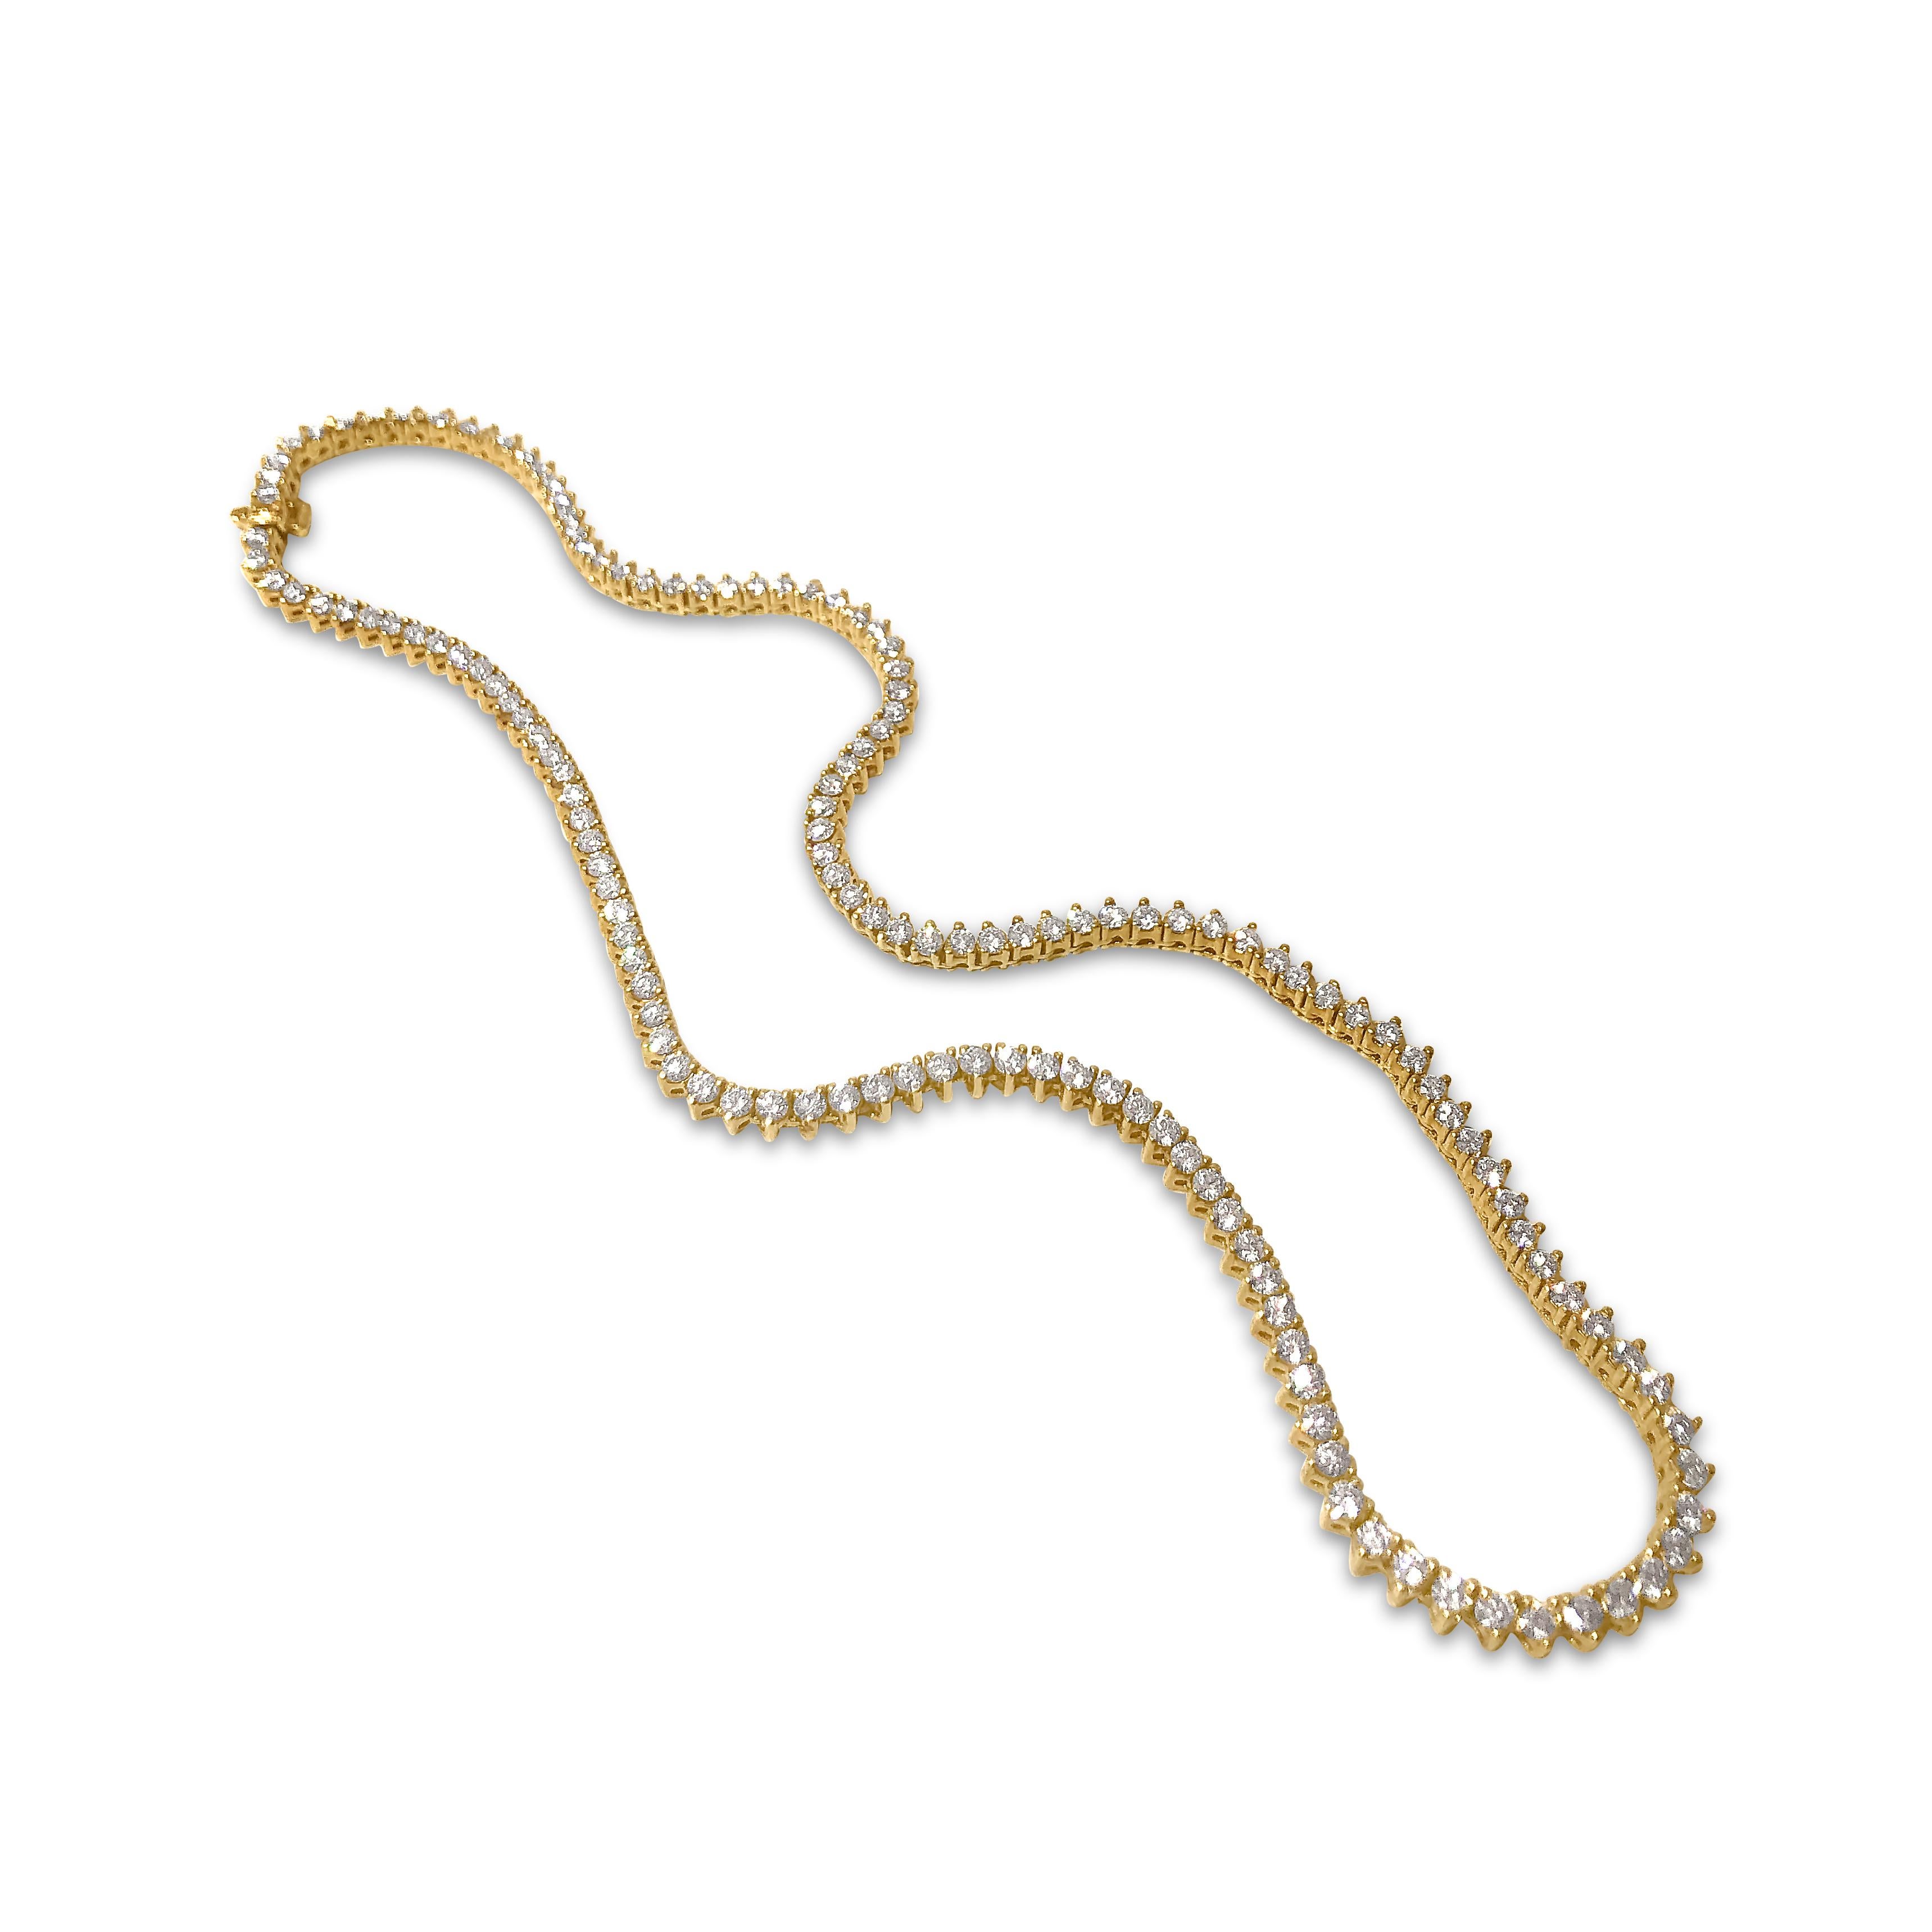 Our 18K yellow gold and diamond necklace is a bonafide show-stopper. This straight line necklace features 143 round 2.7mm diamonds, totaling 11.70ct, with a secure closure.

Specifications:
- Stone(s): Diamonds
- Diamond-Cut & Clarity:  11.70ct.